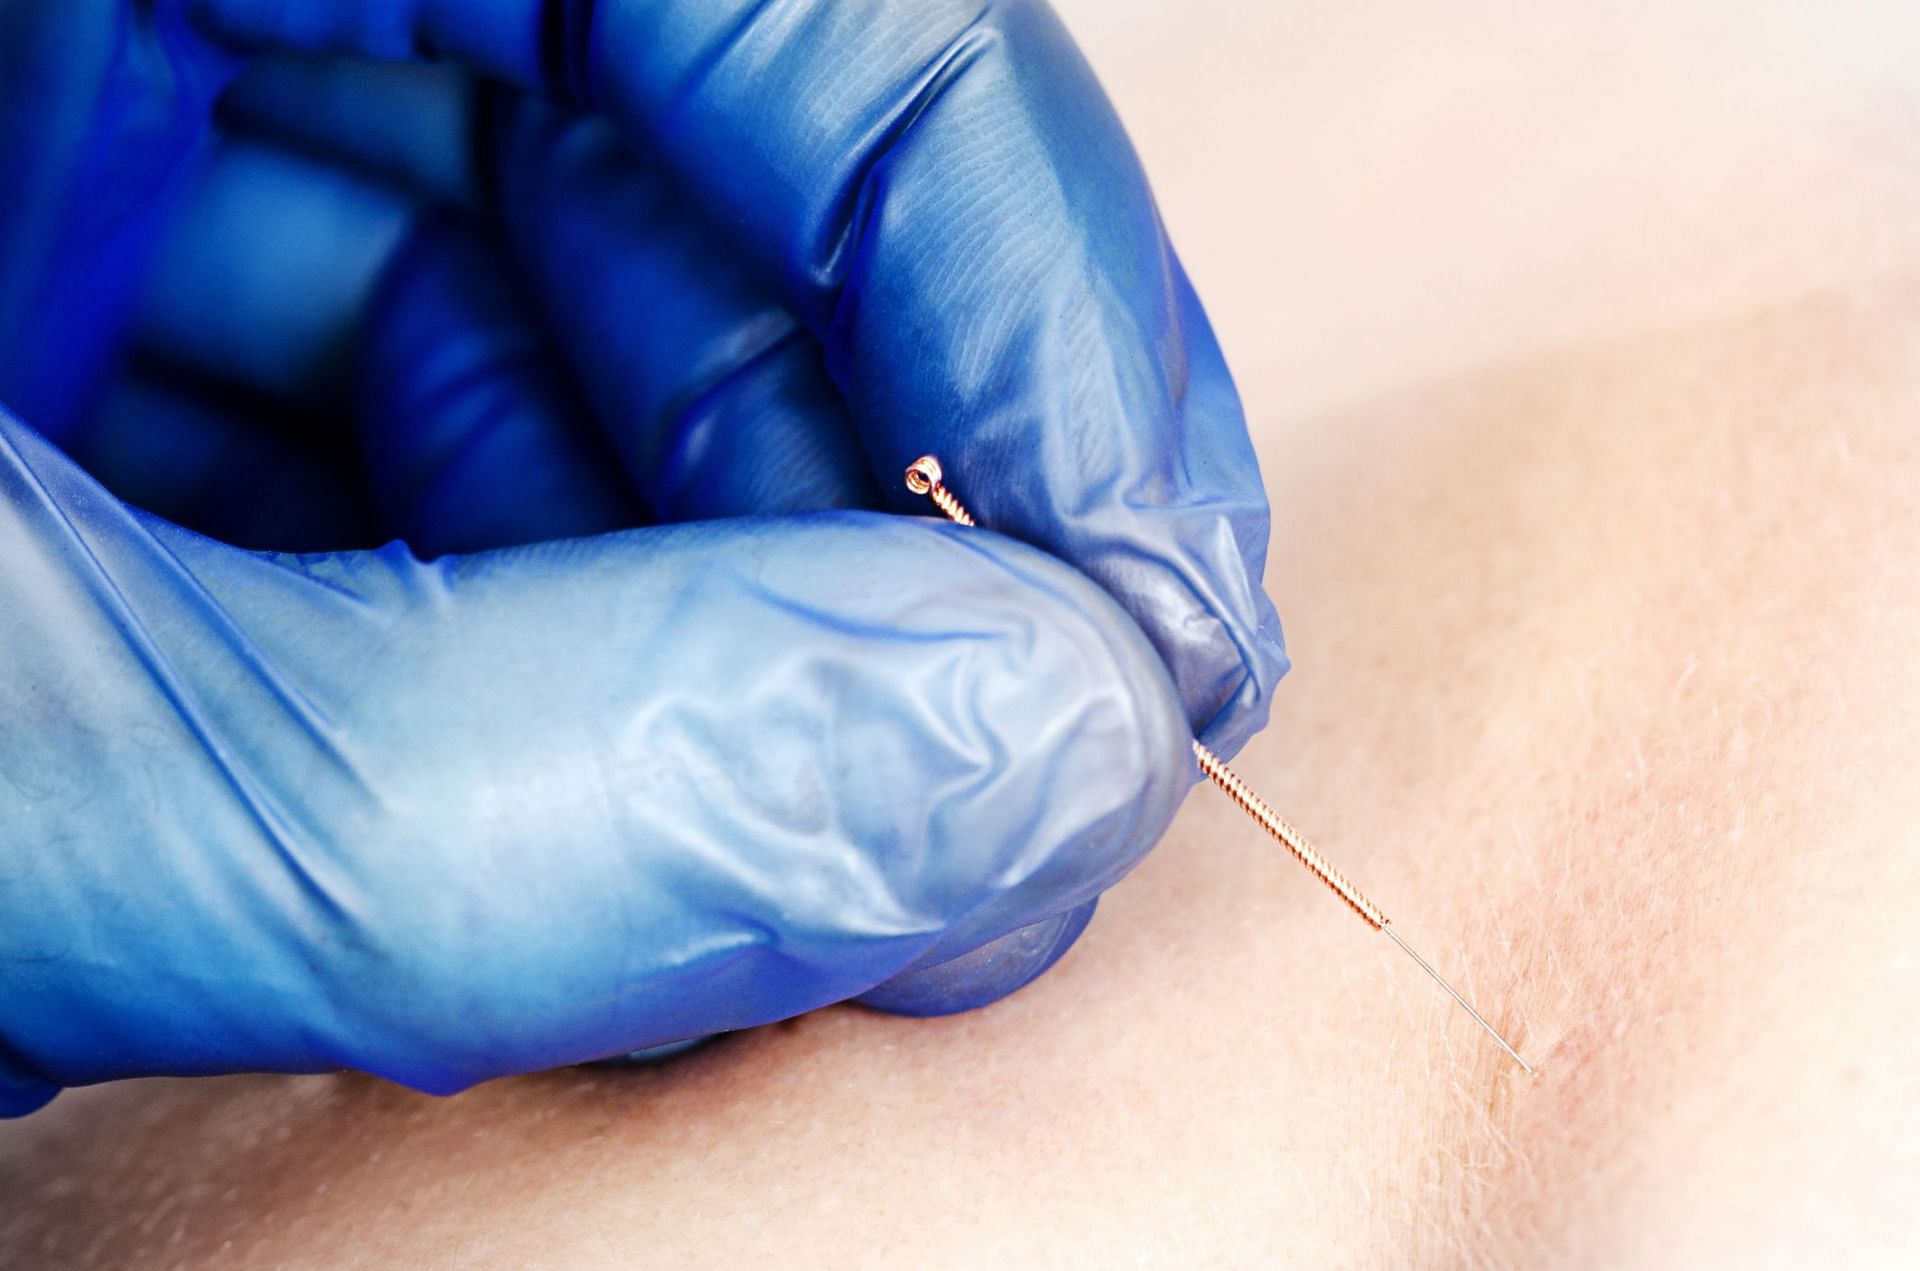 Dry needling vs. acupuncture (Image via Getty Images/ Sunlight19)